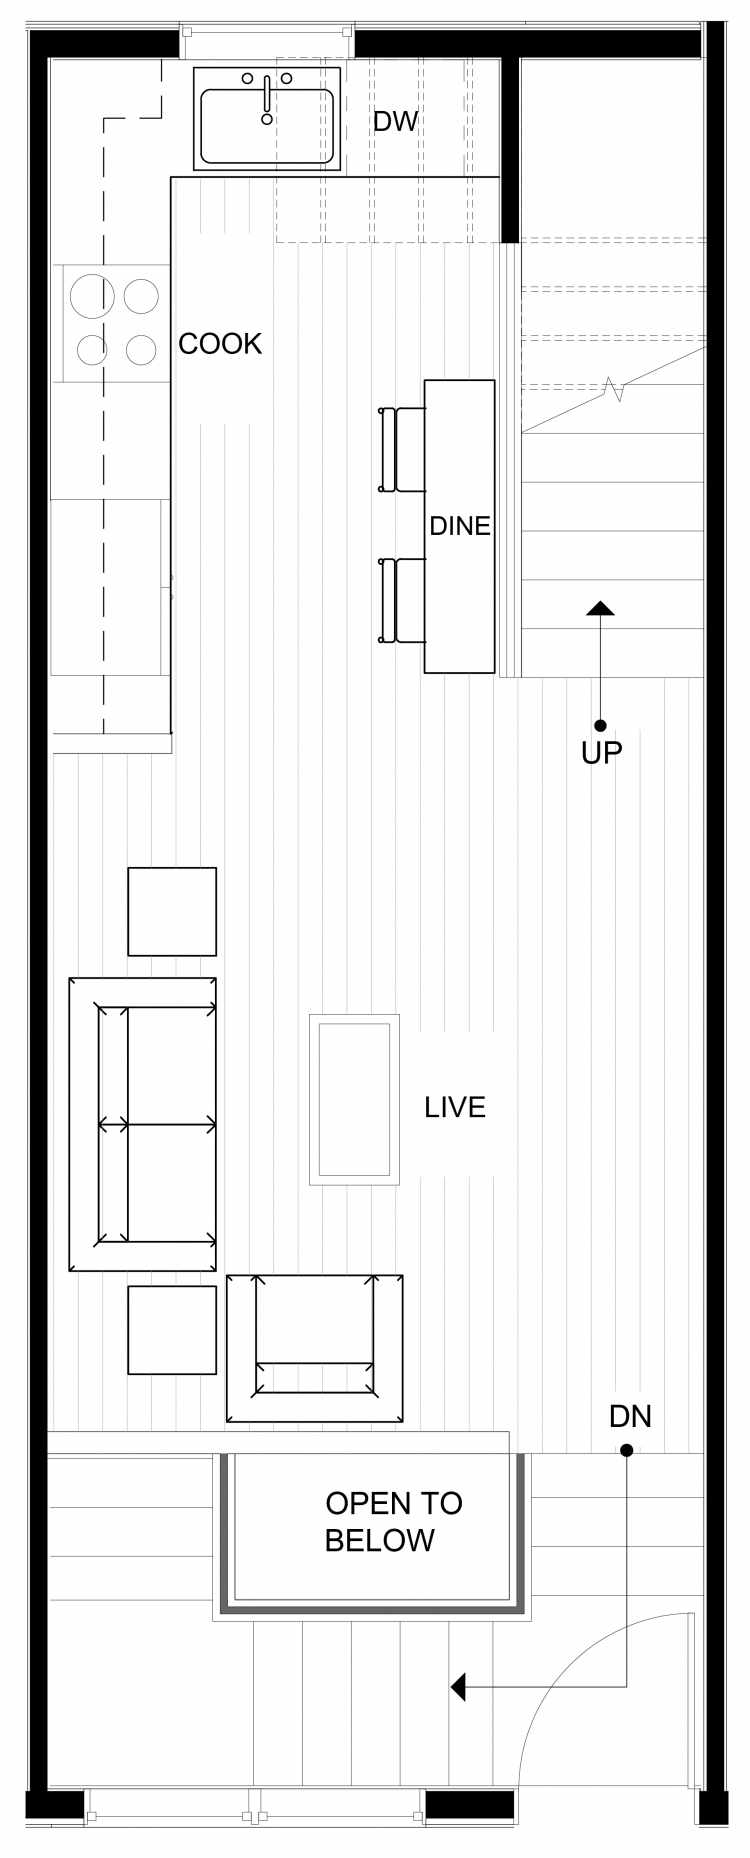 Second Floor Plan of 1542 15th Ave E, One of the Larrabee Townhomes in Capitol Hill